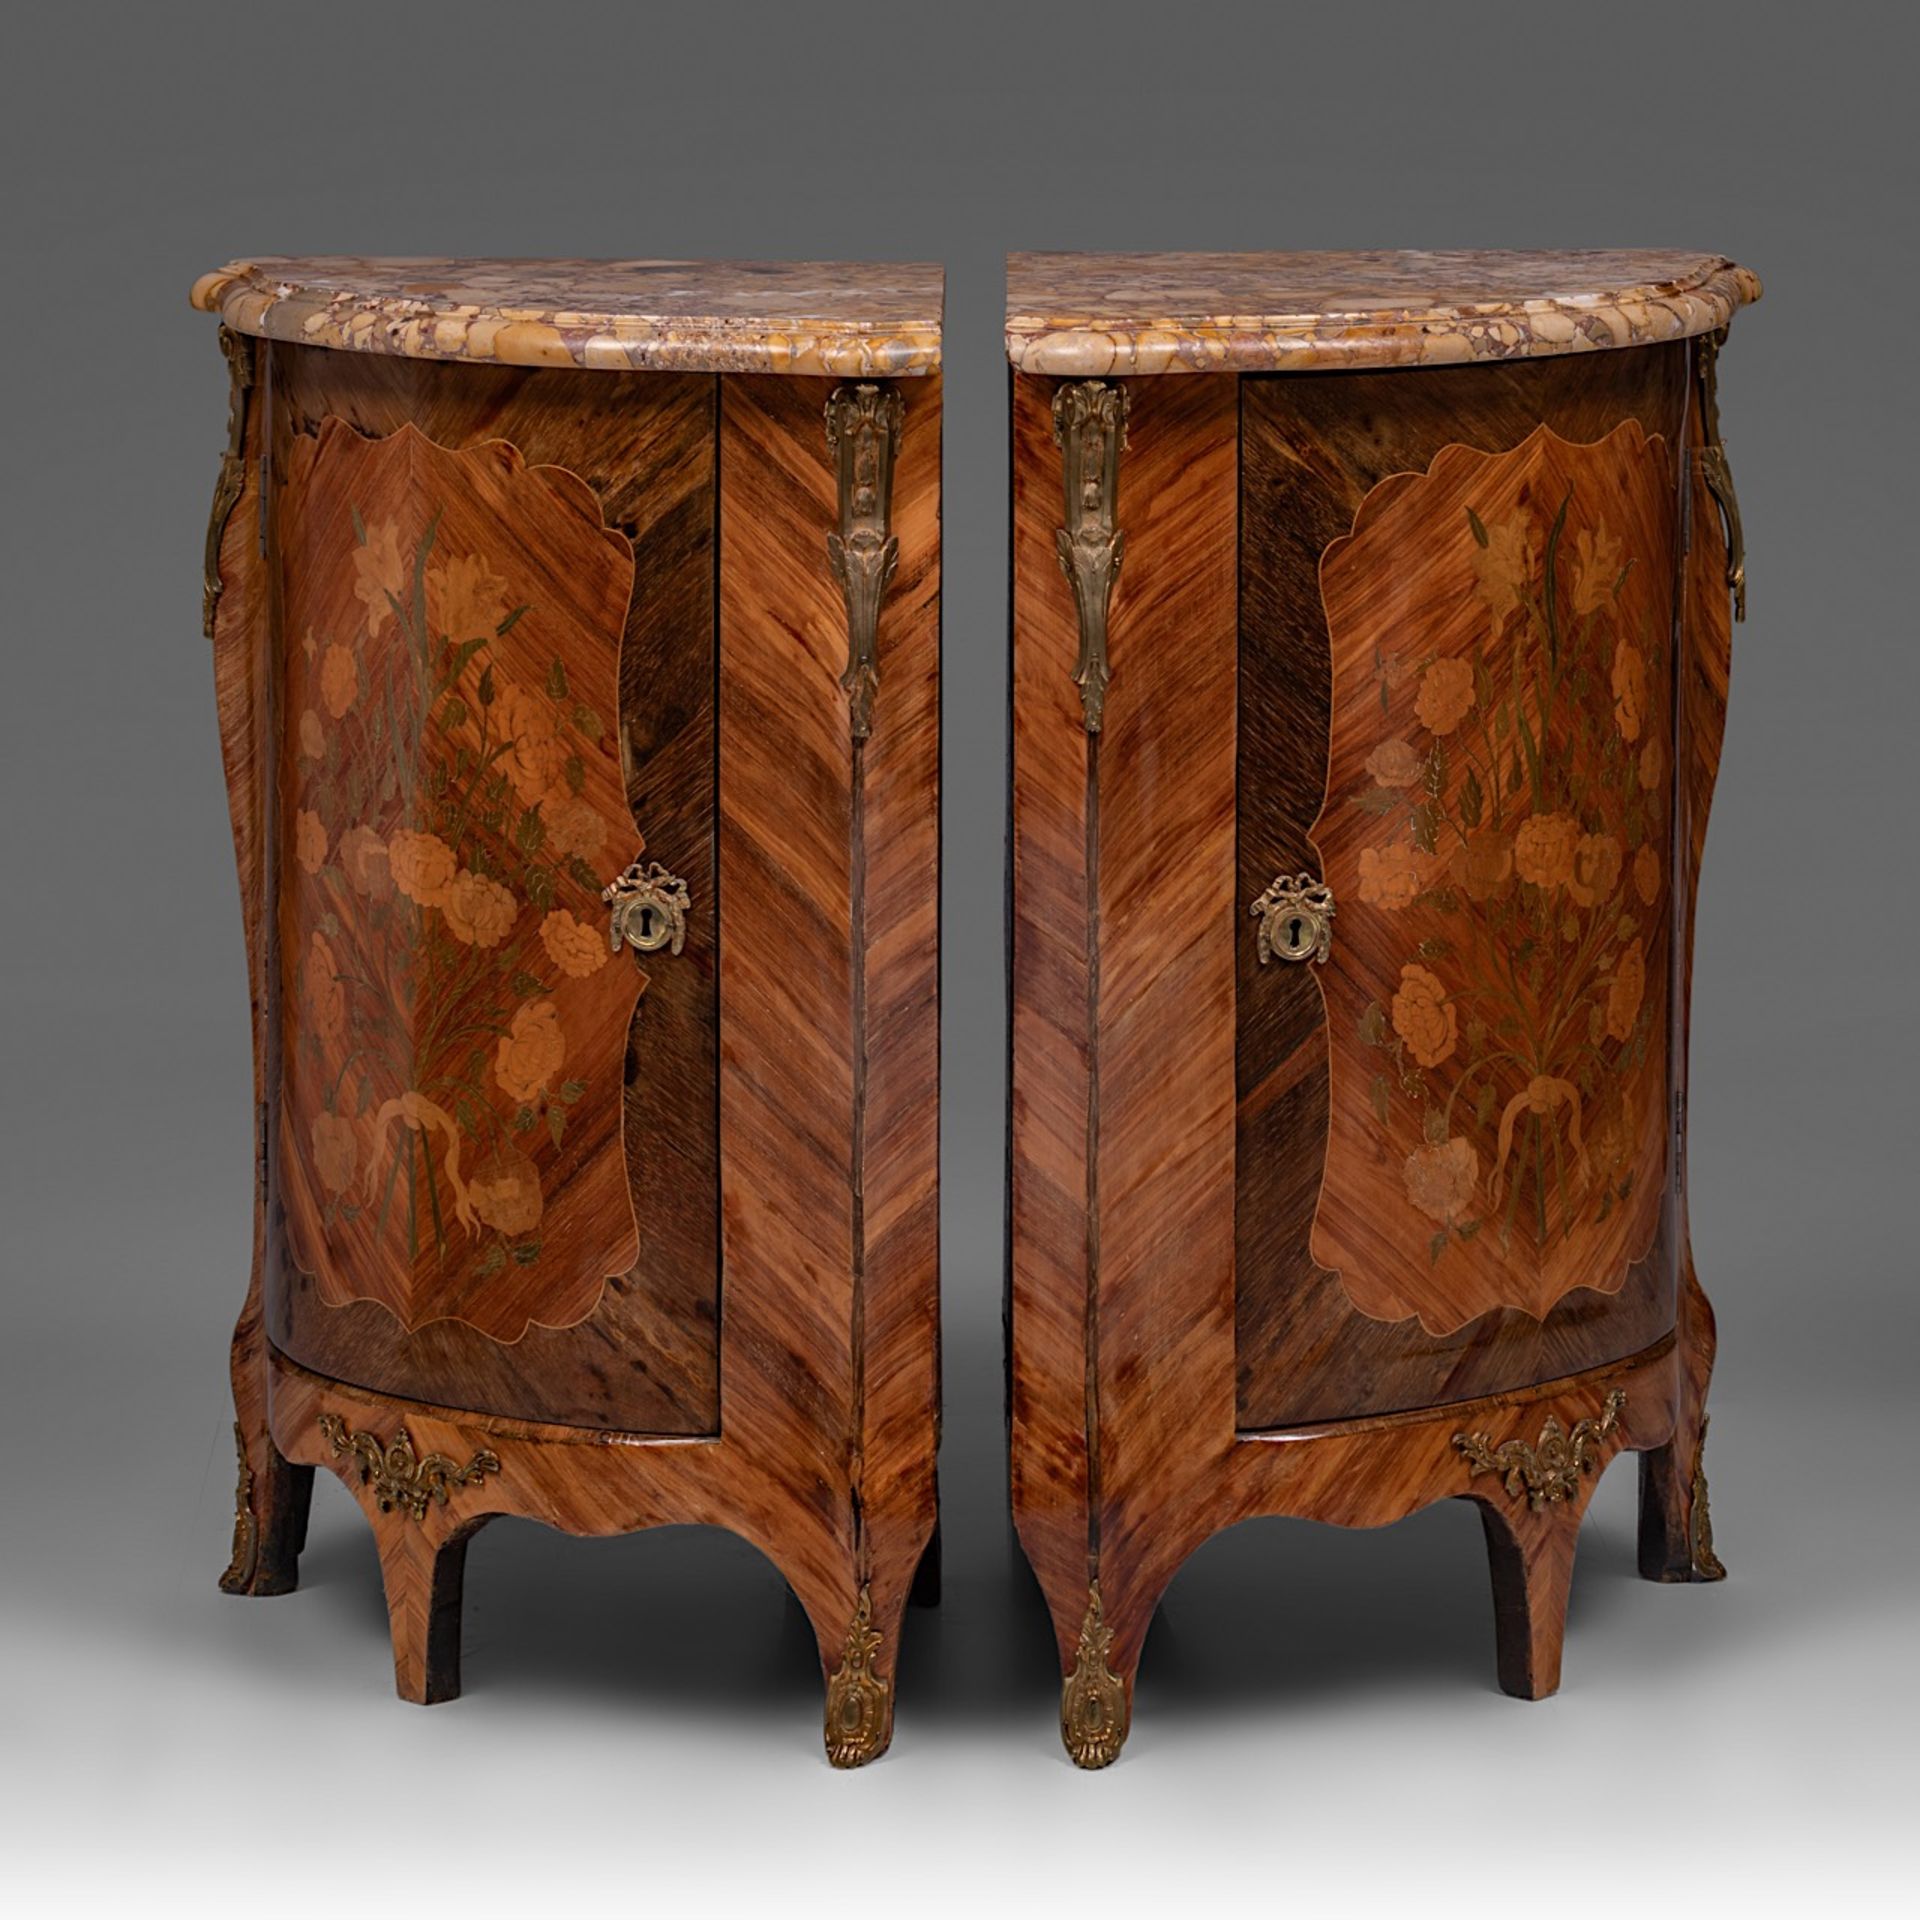 A fine pair of Louis XV 'encoignures' with floral marquetry and Breche d'Alep marble top, mid 18thC, - Image 2 of 5